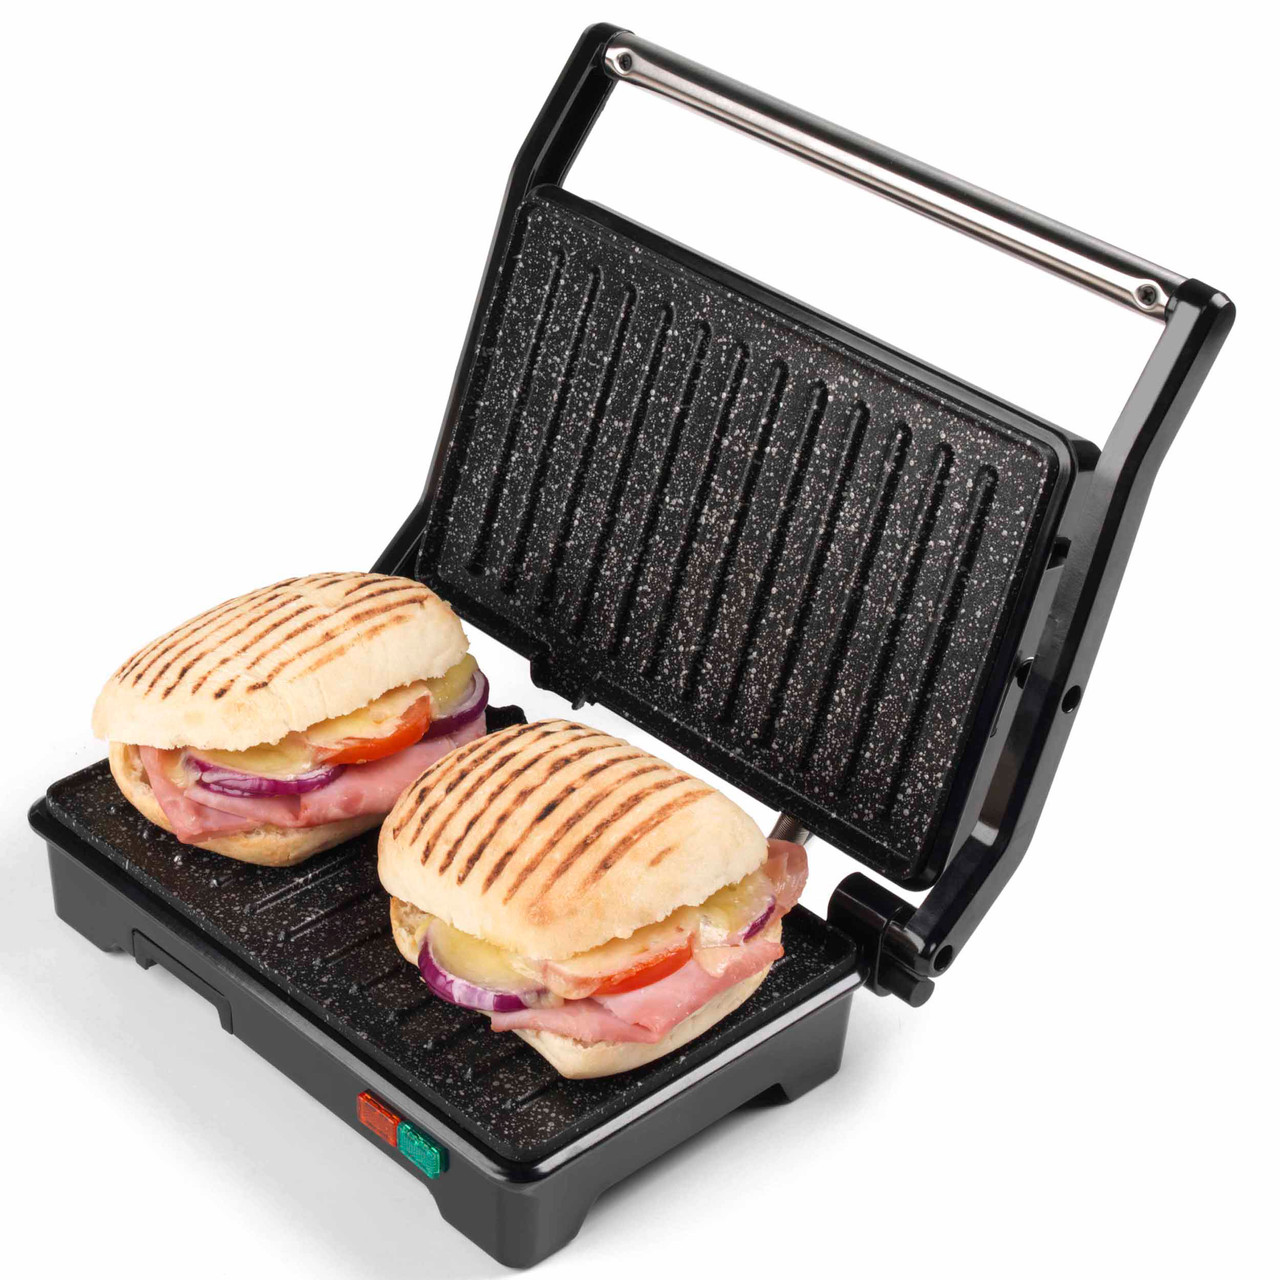 UltraCompact SM156D21 Croque & Grill - 700W